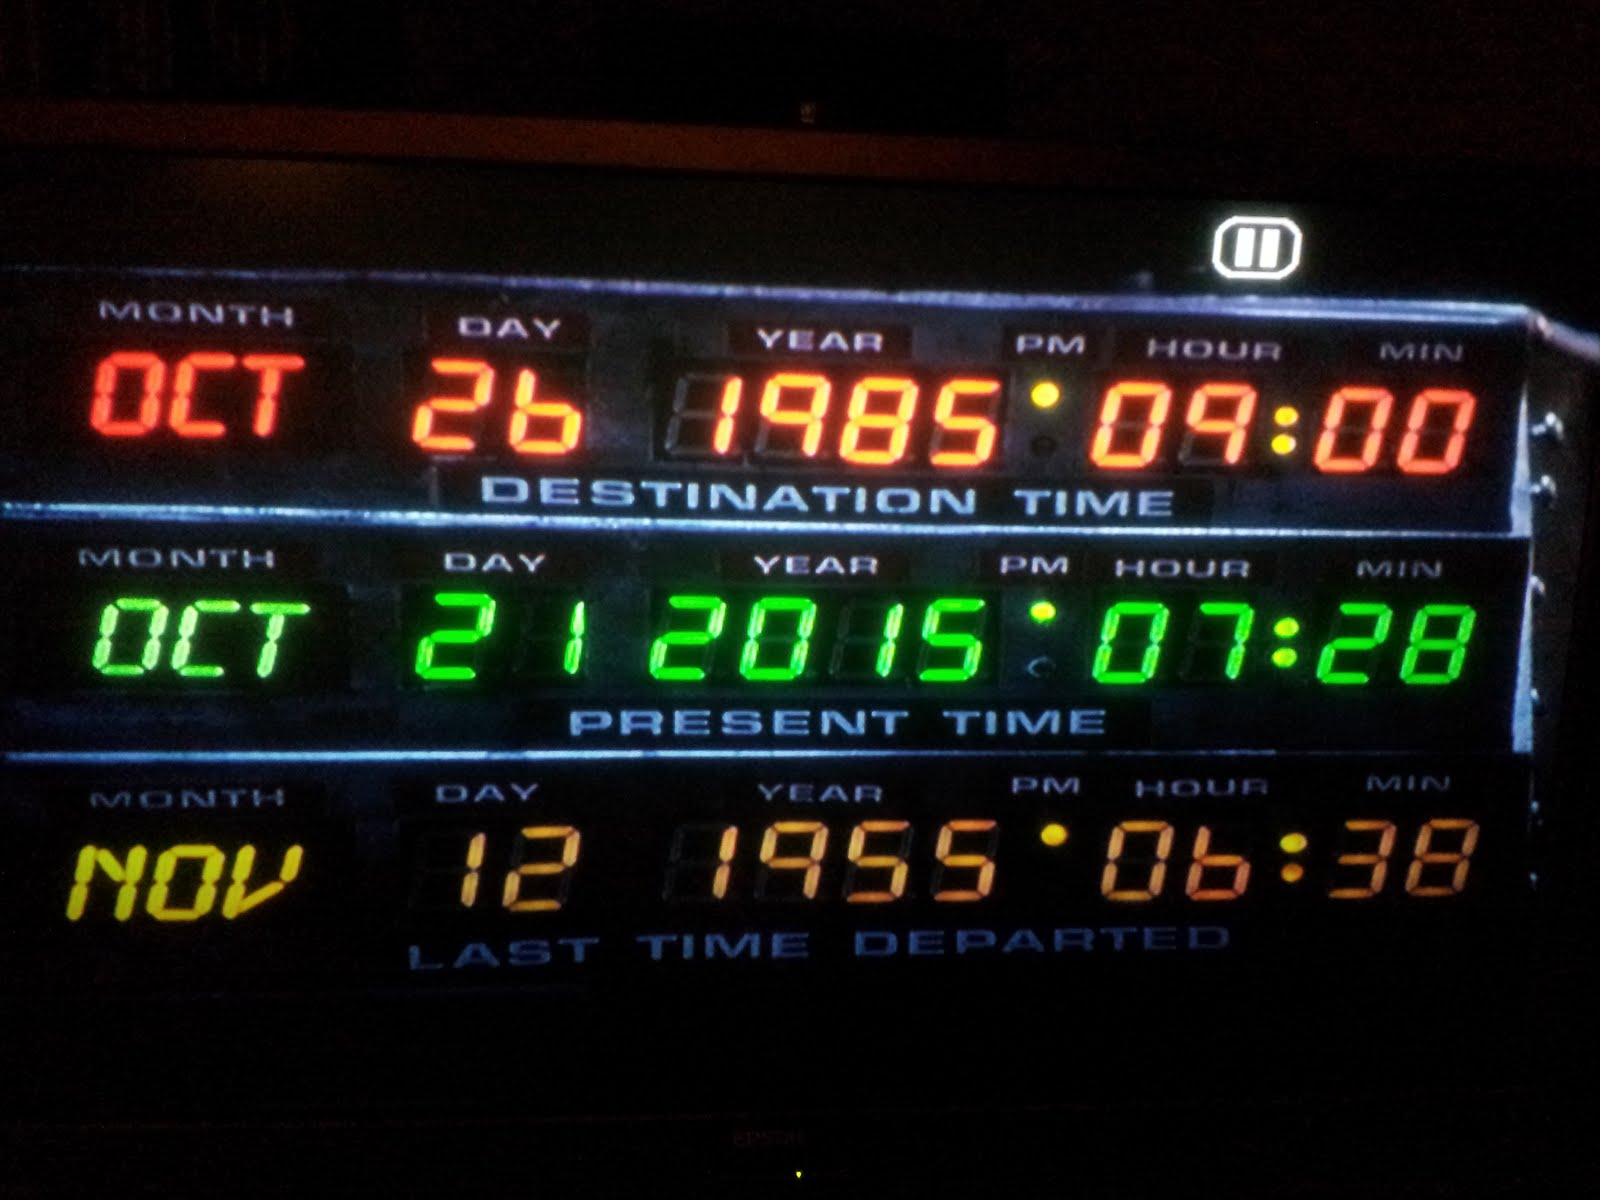 Movie image from back to the future where it shows the date of the future.